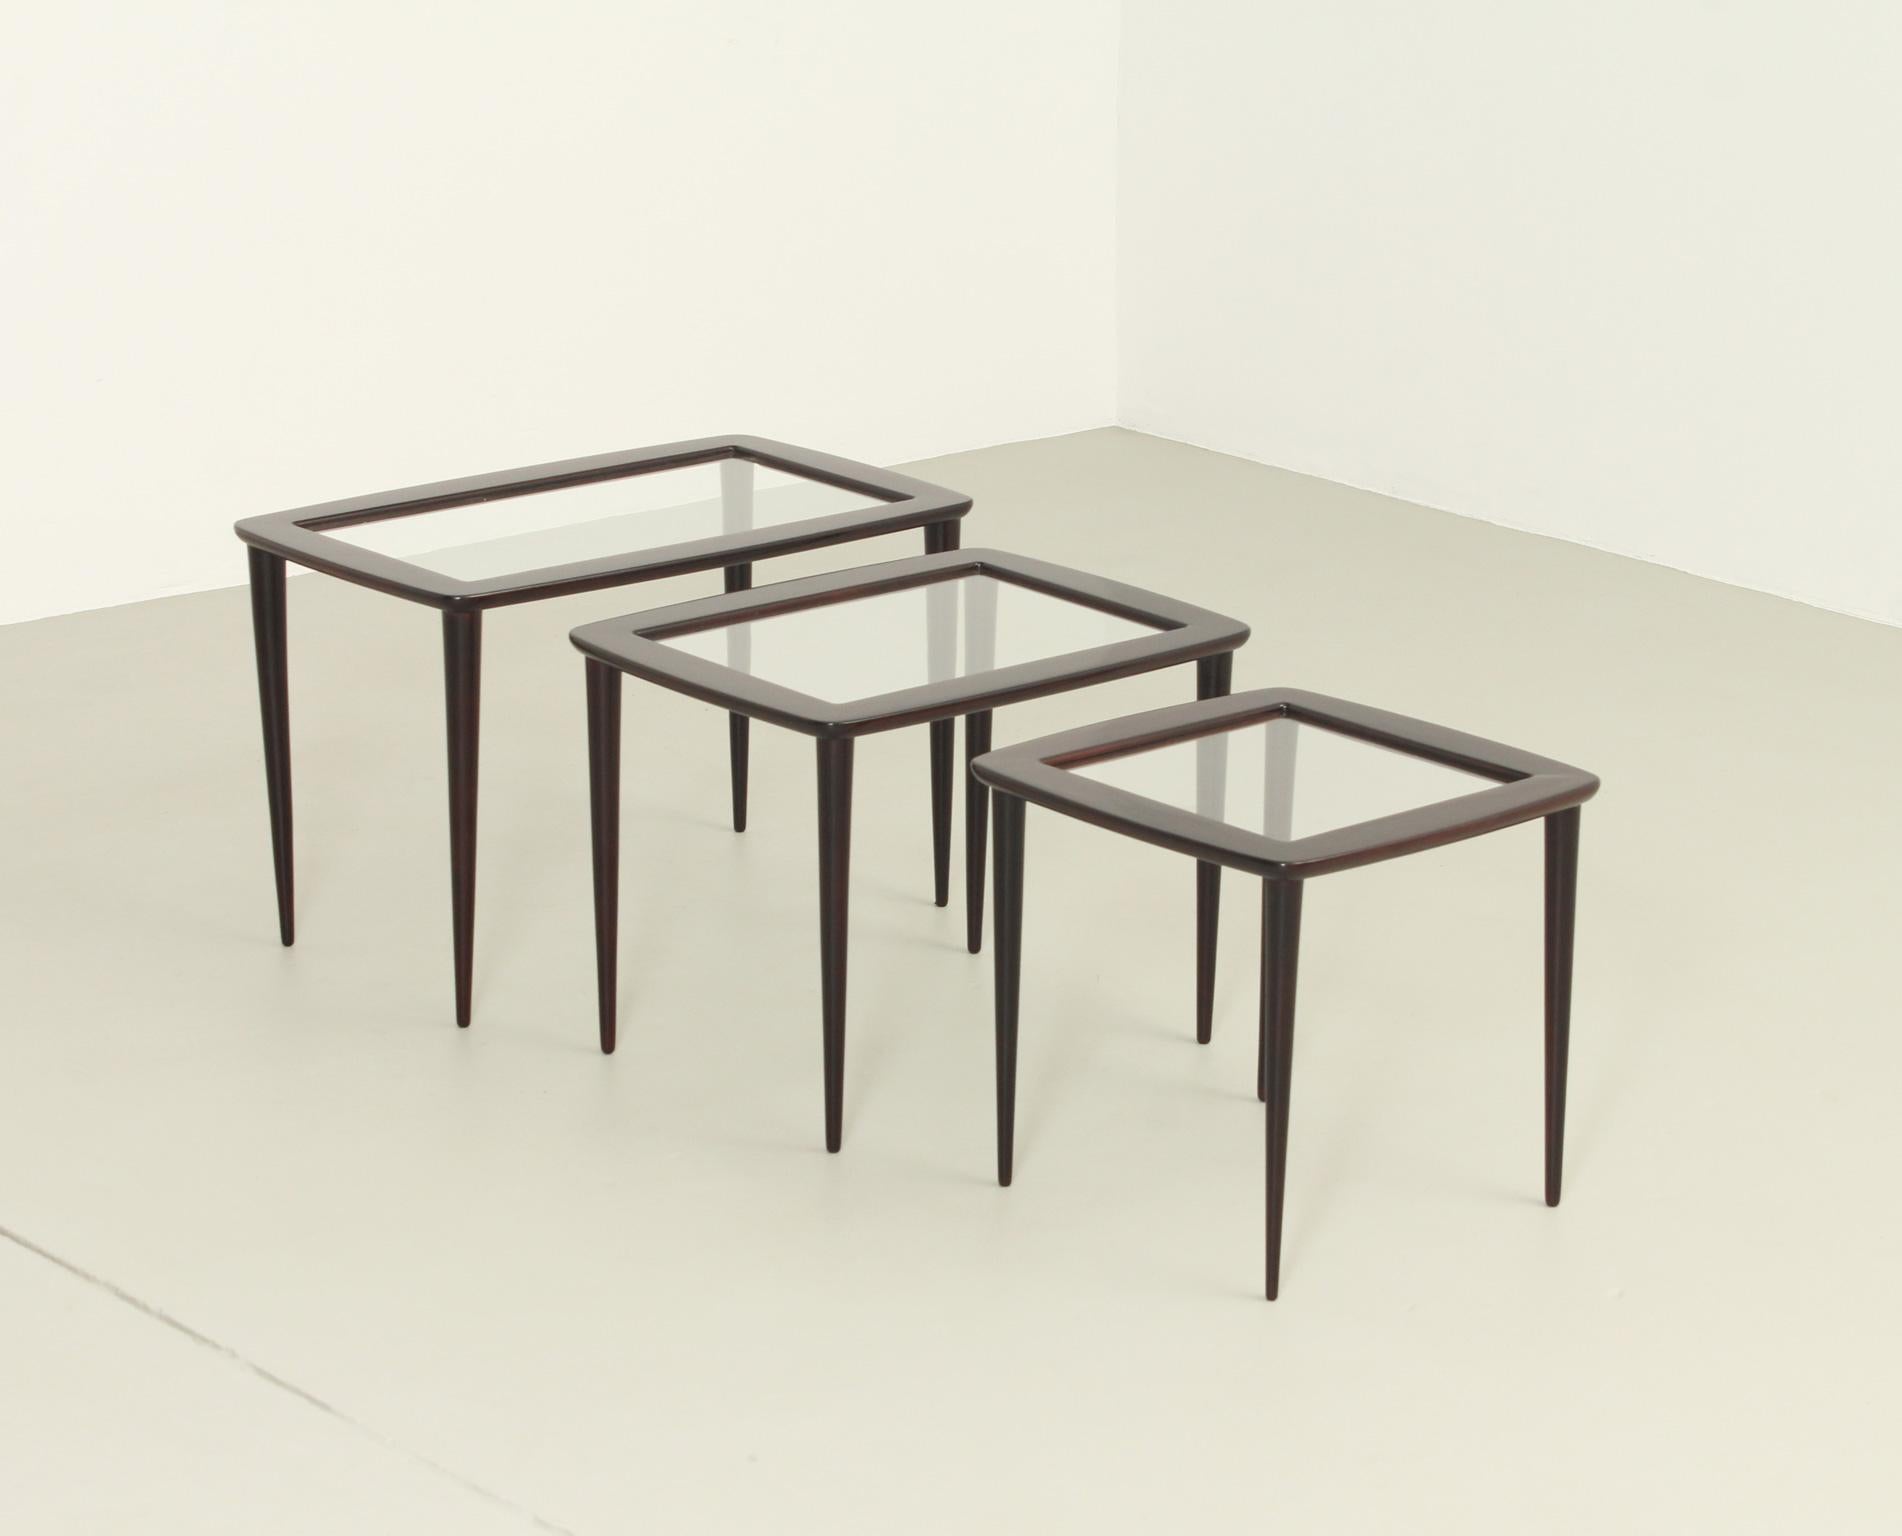 Set of Nesting Tables by Ico Parisi for De Baggis, 1955 For Sale 4